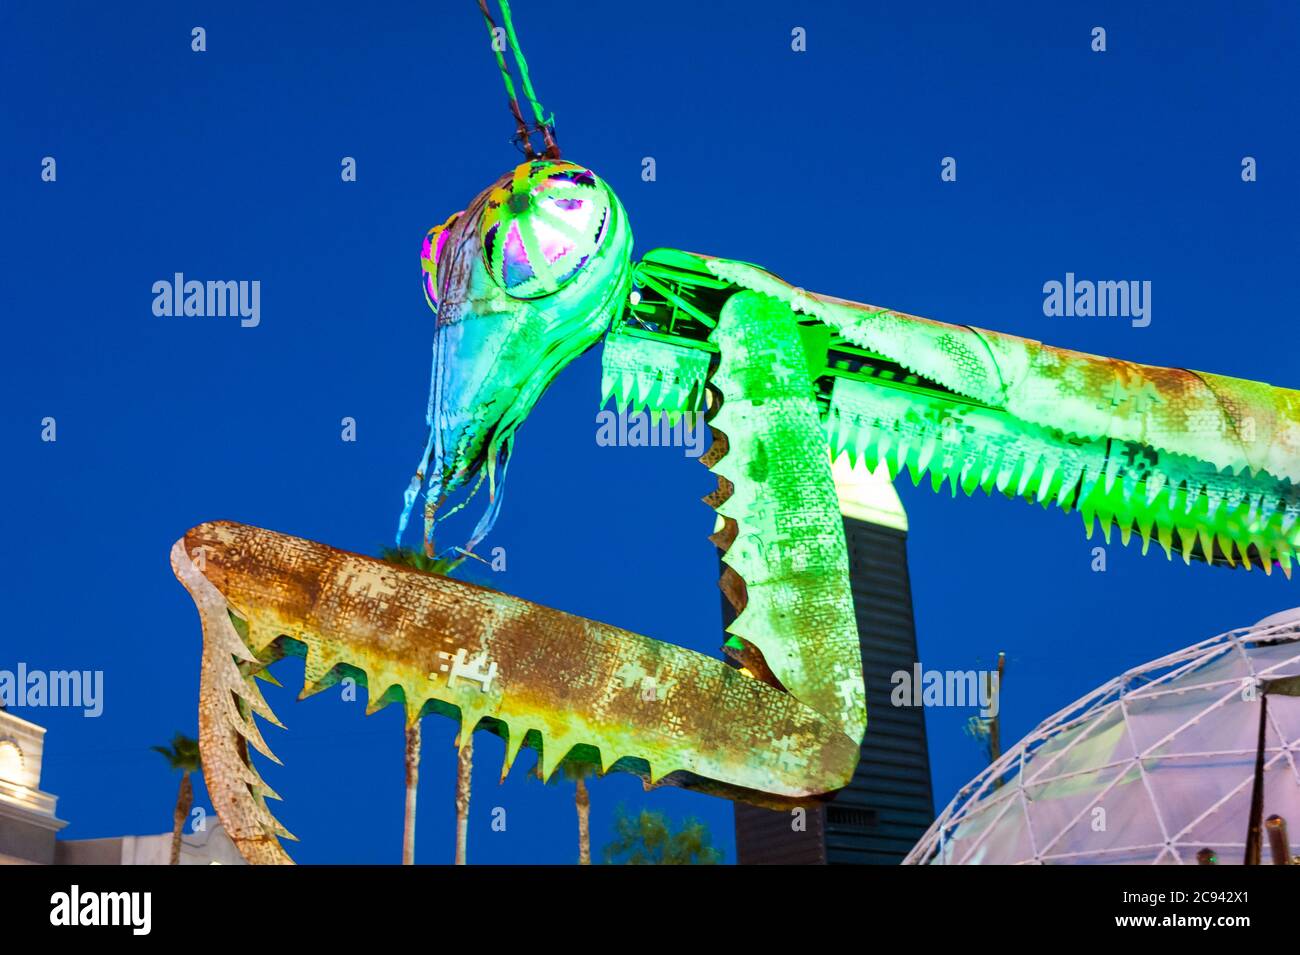 Fire breathing giant Praying Mantis arts sculpture in Old Las Vegas’ Container Park Stock Photo